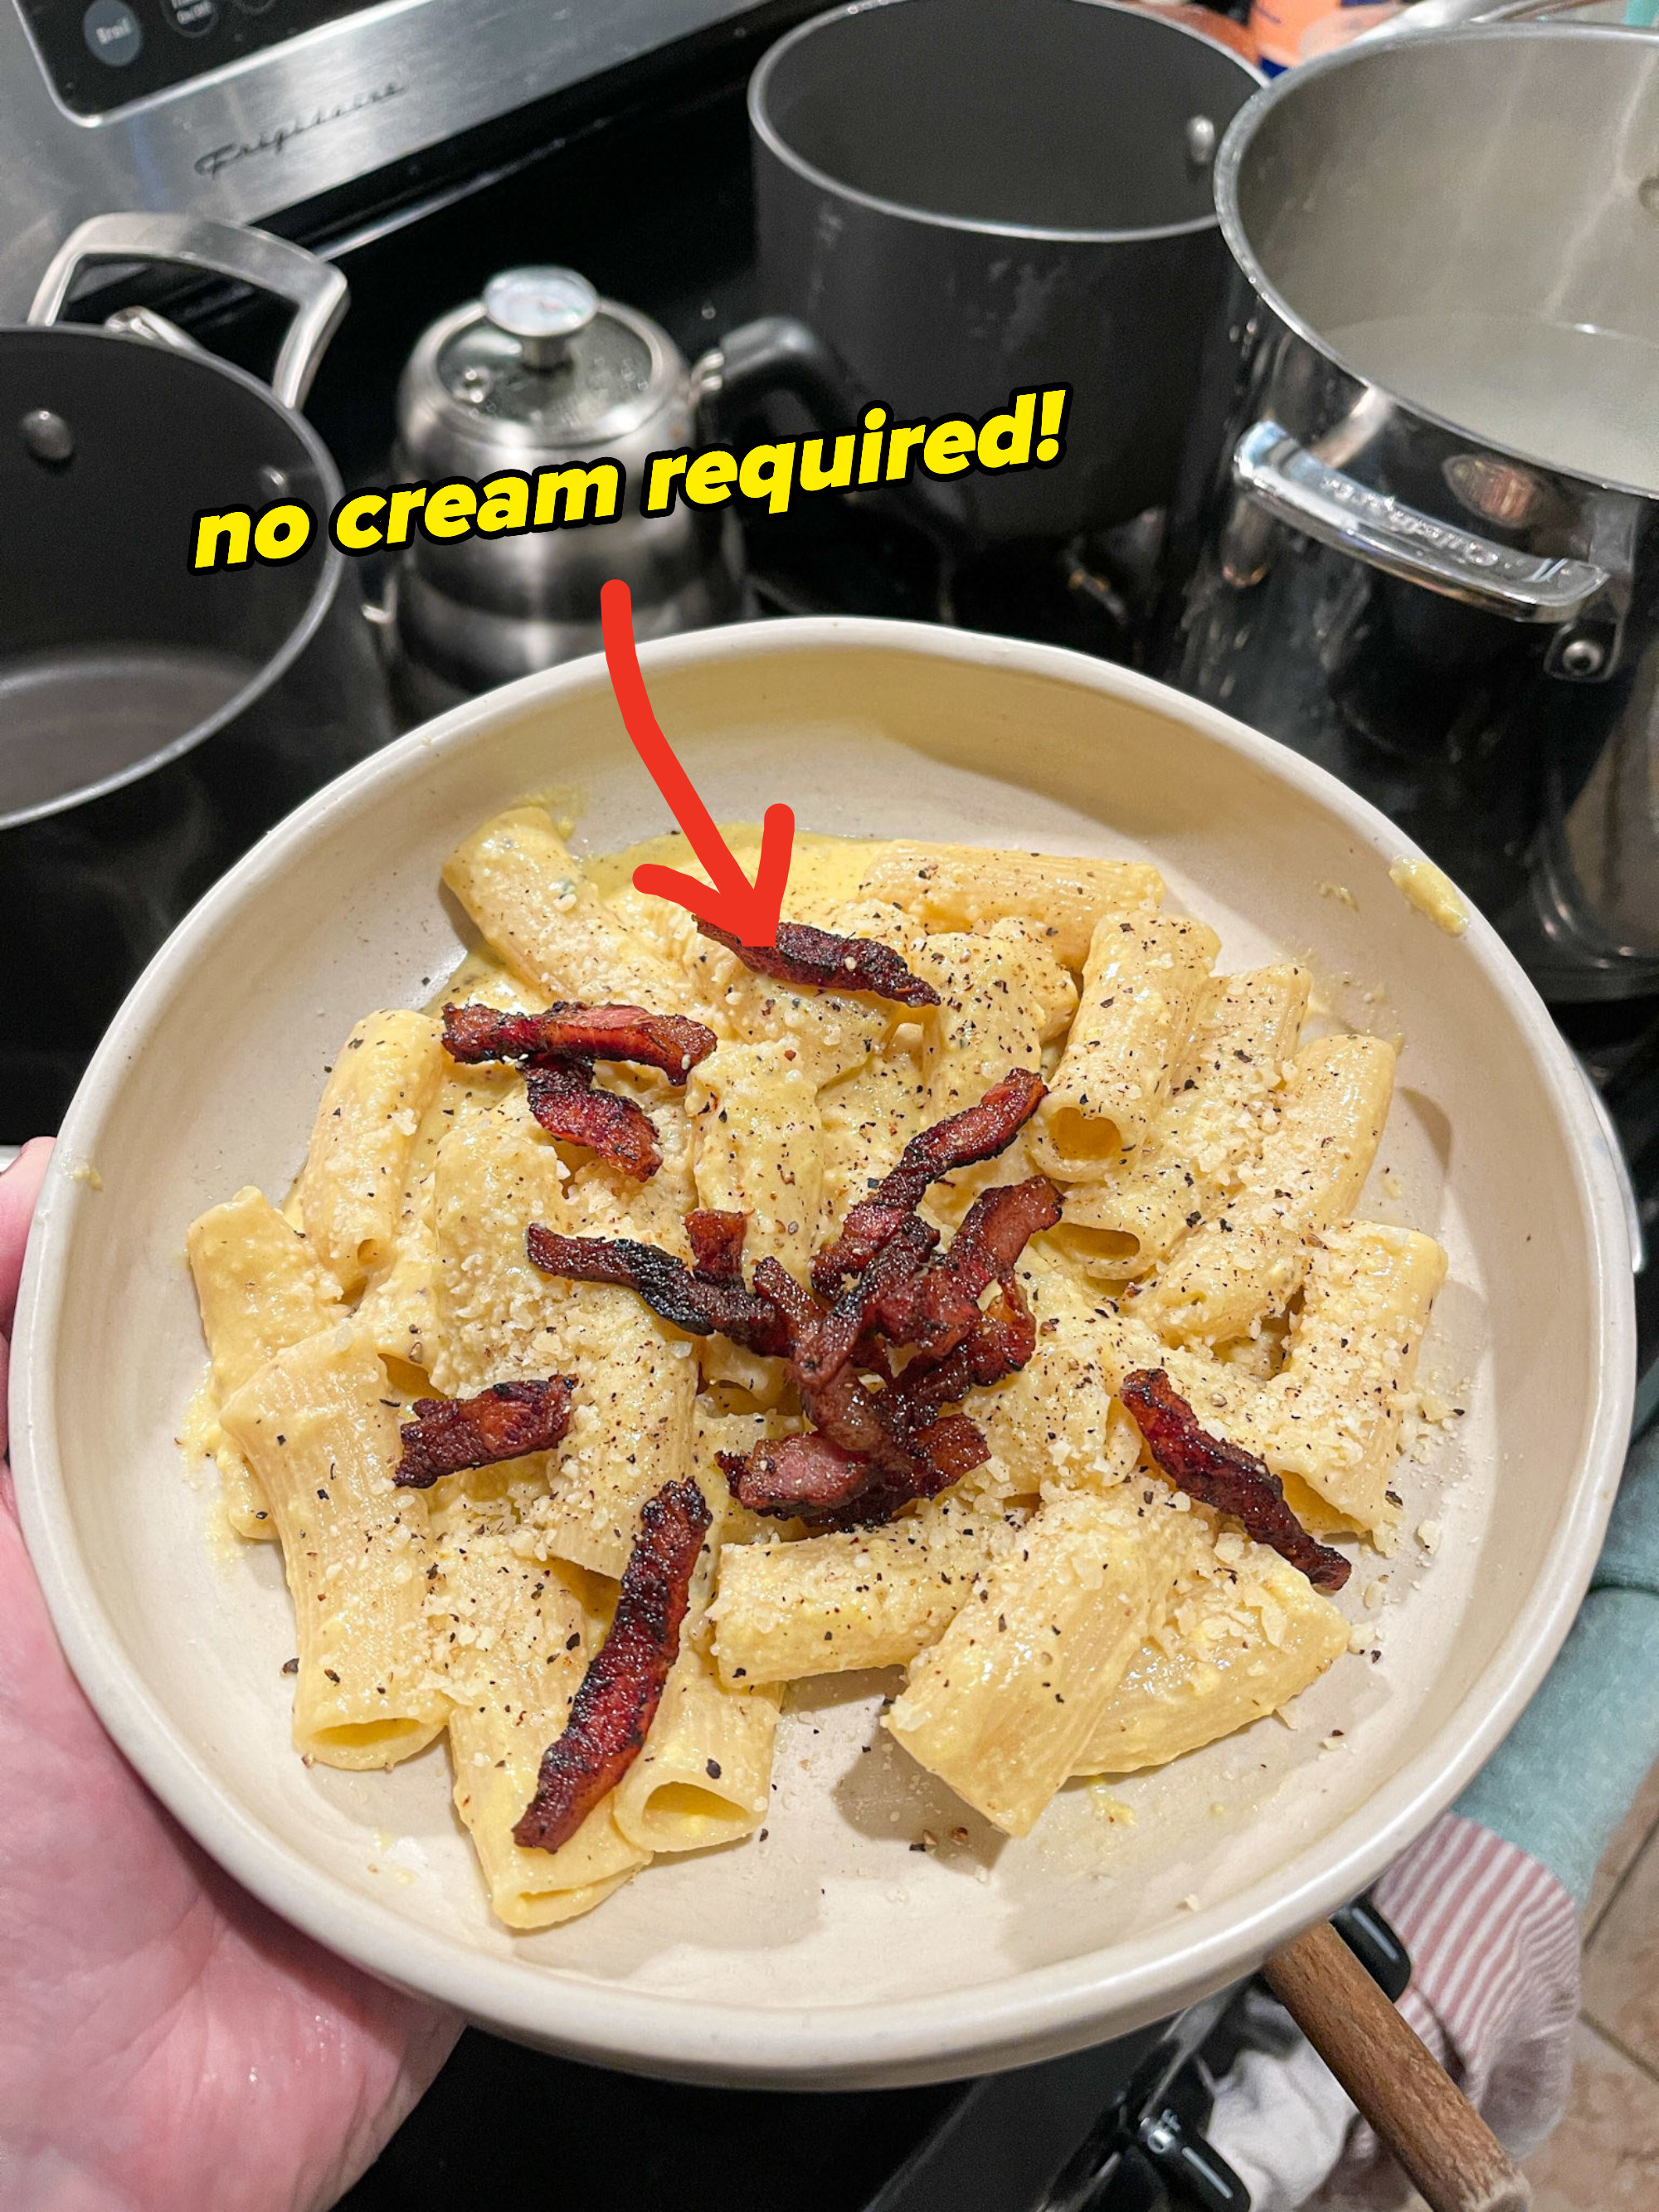 creamy looking carbonara topped with crispy guanciale and parmesan cheese